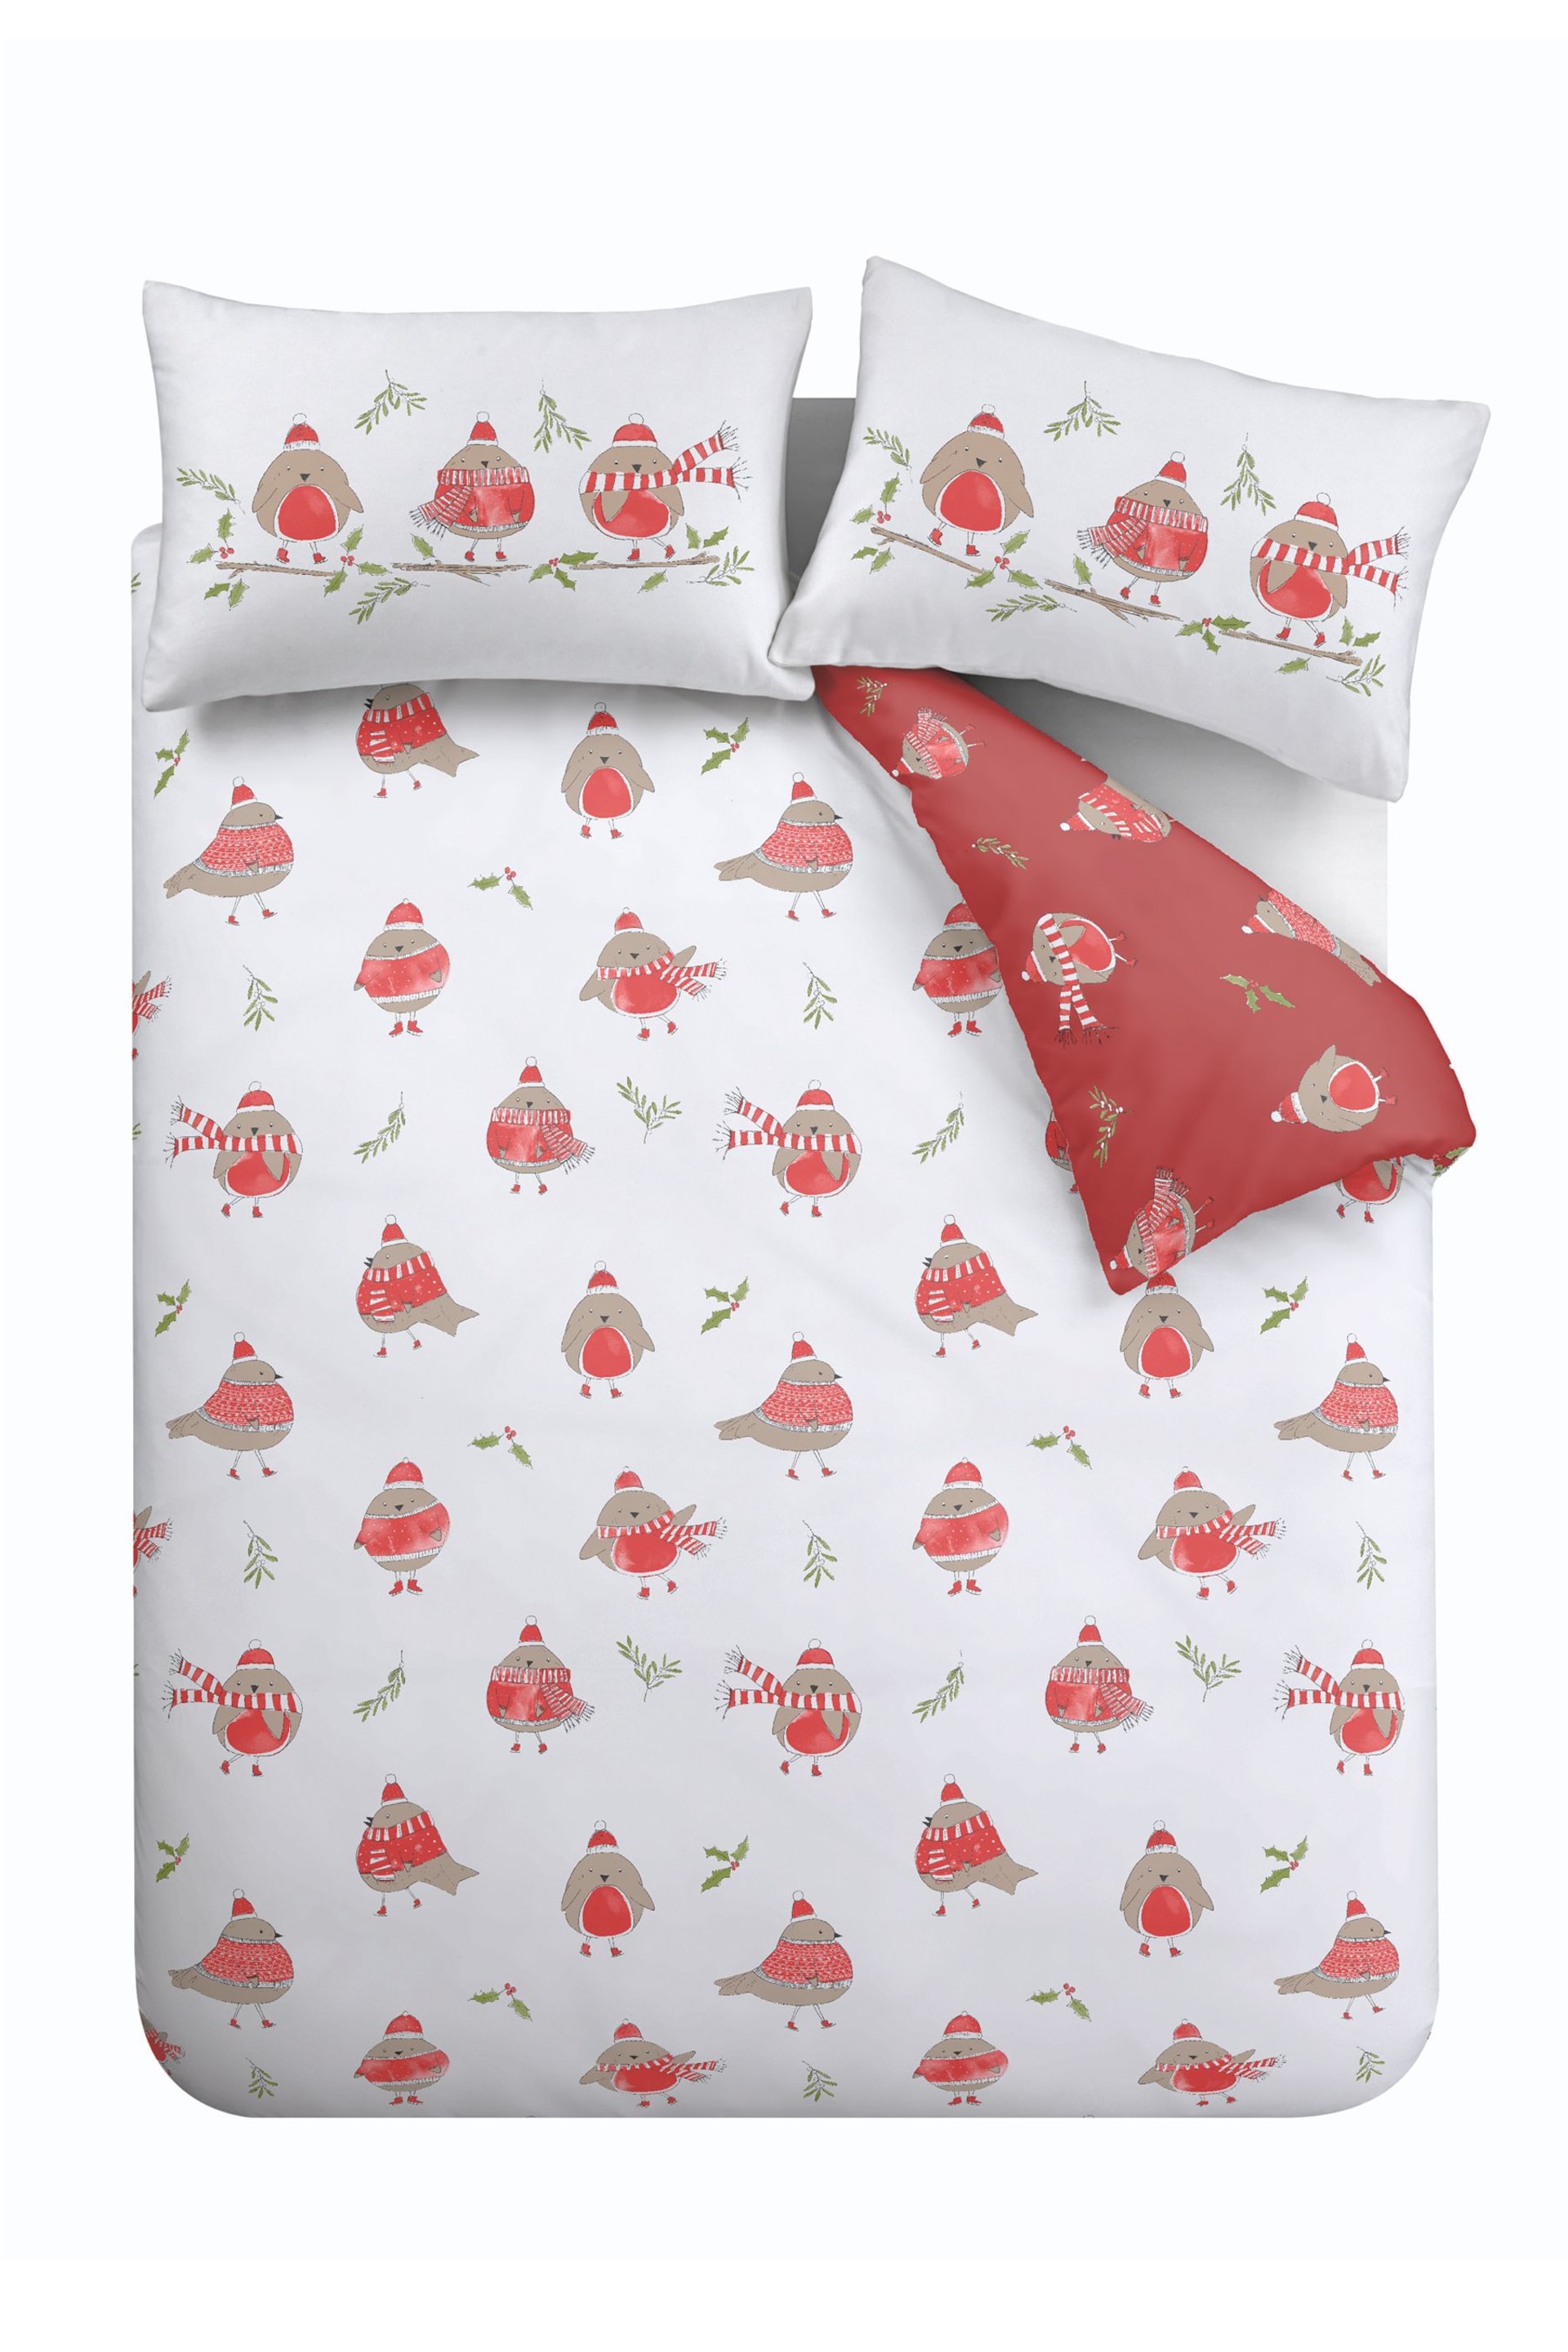 Catherine Lansfield Red Christmas Robins Duvet Cover and Pillowcase Set - Image 4 of 4